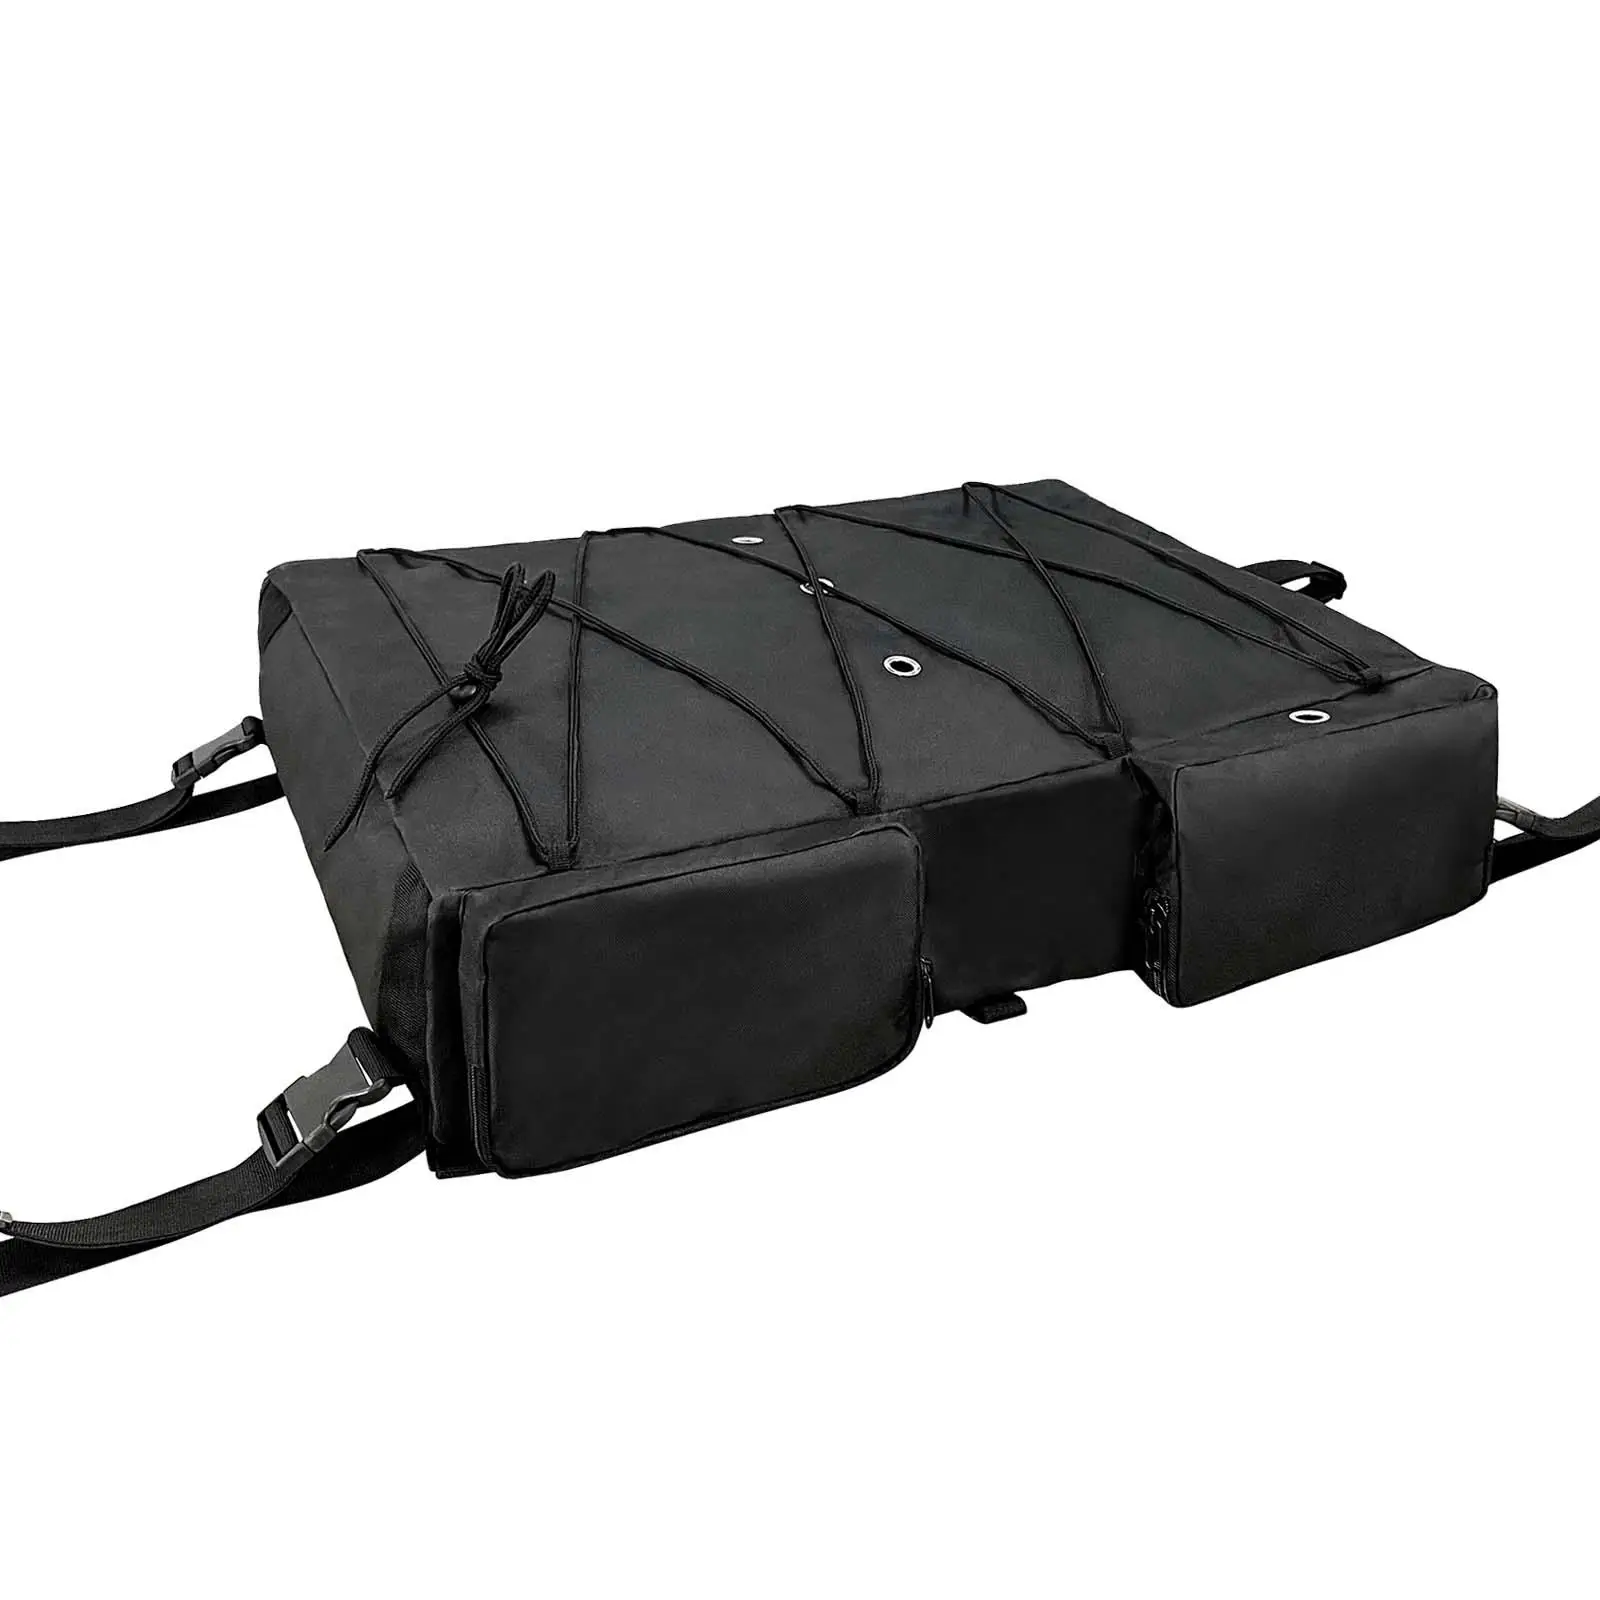 T Bag T Top and Bimini Top Storage Pack T Bag Durable Bimini Top T Top Overhead Storage Bag Packs For T Top Boats Pontoon Tops